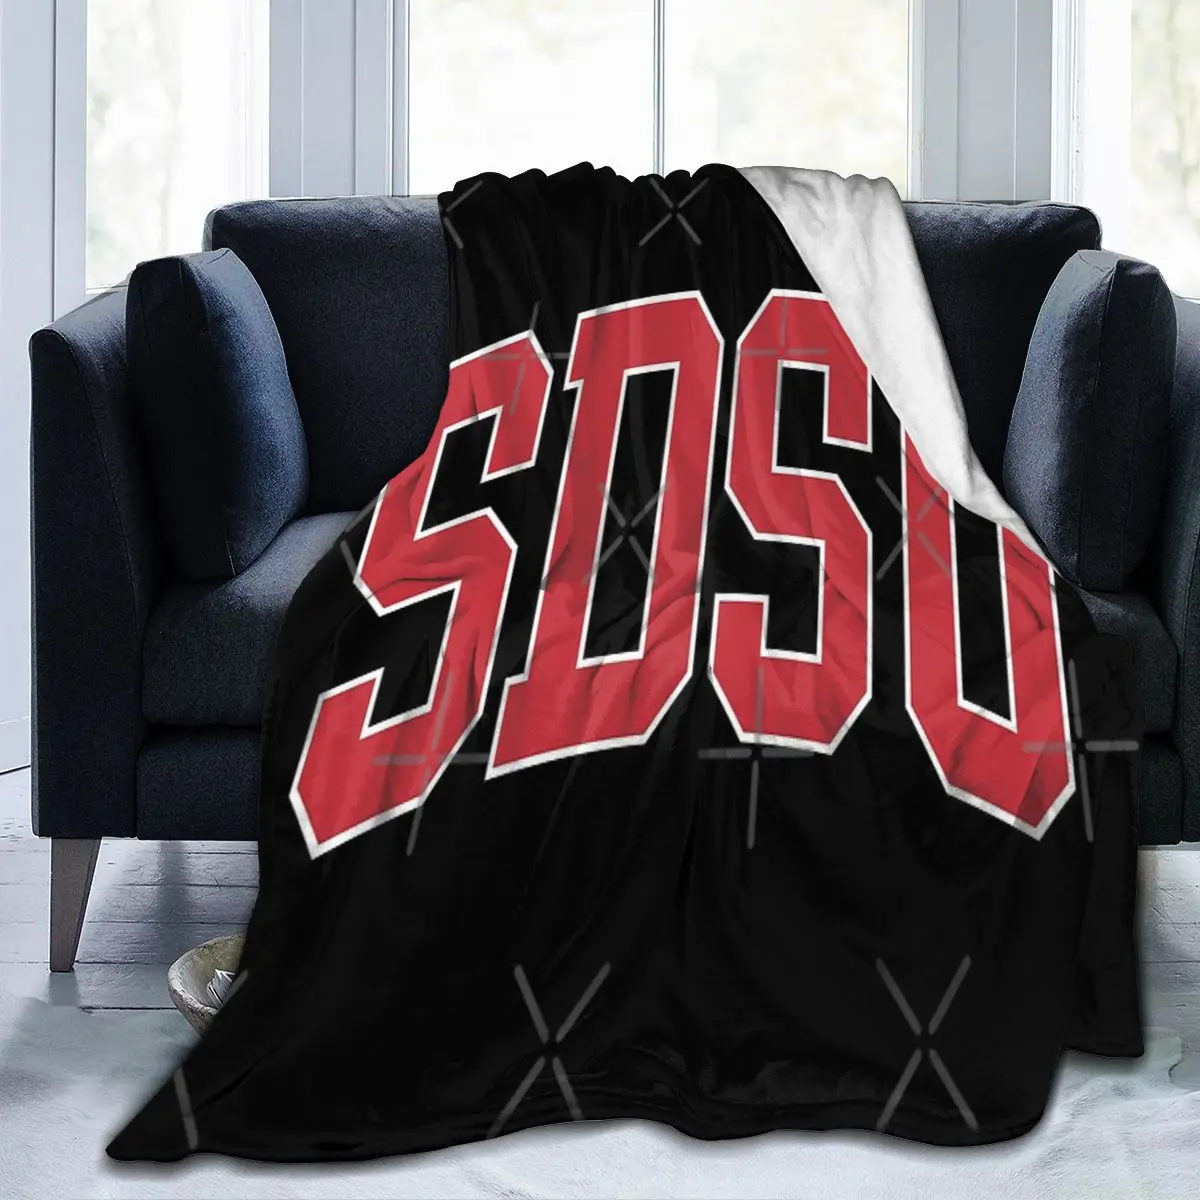 

Sdsu - College Font Curved Blanket, Facecloth Blanket Cute Style Gift AntiPilling Customizable